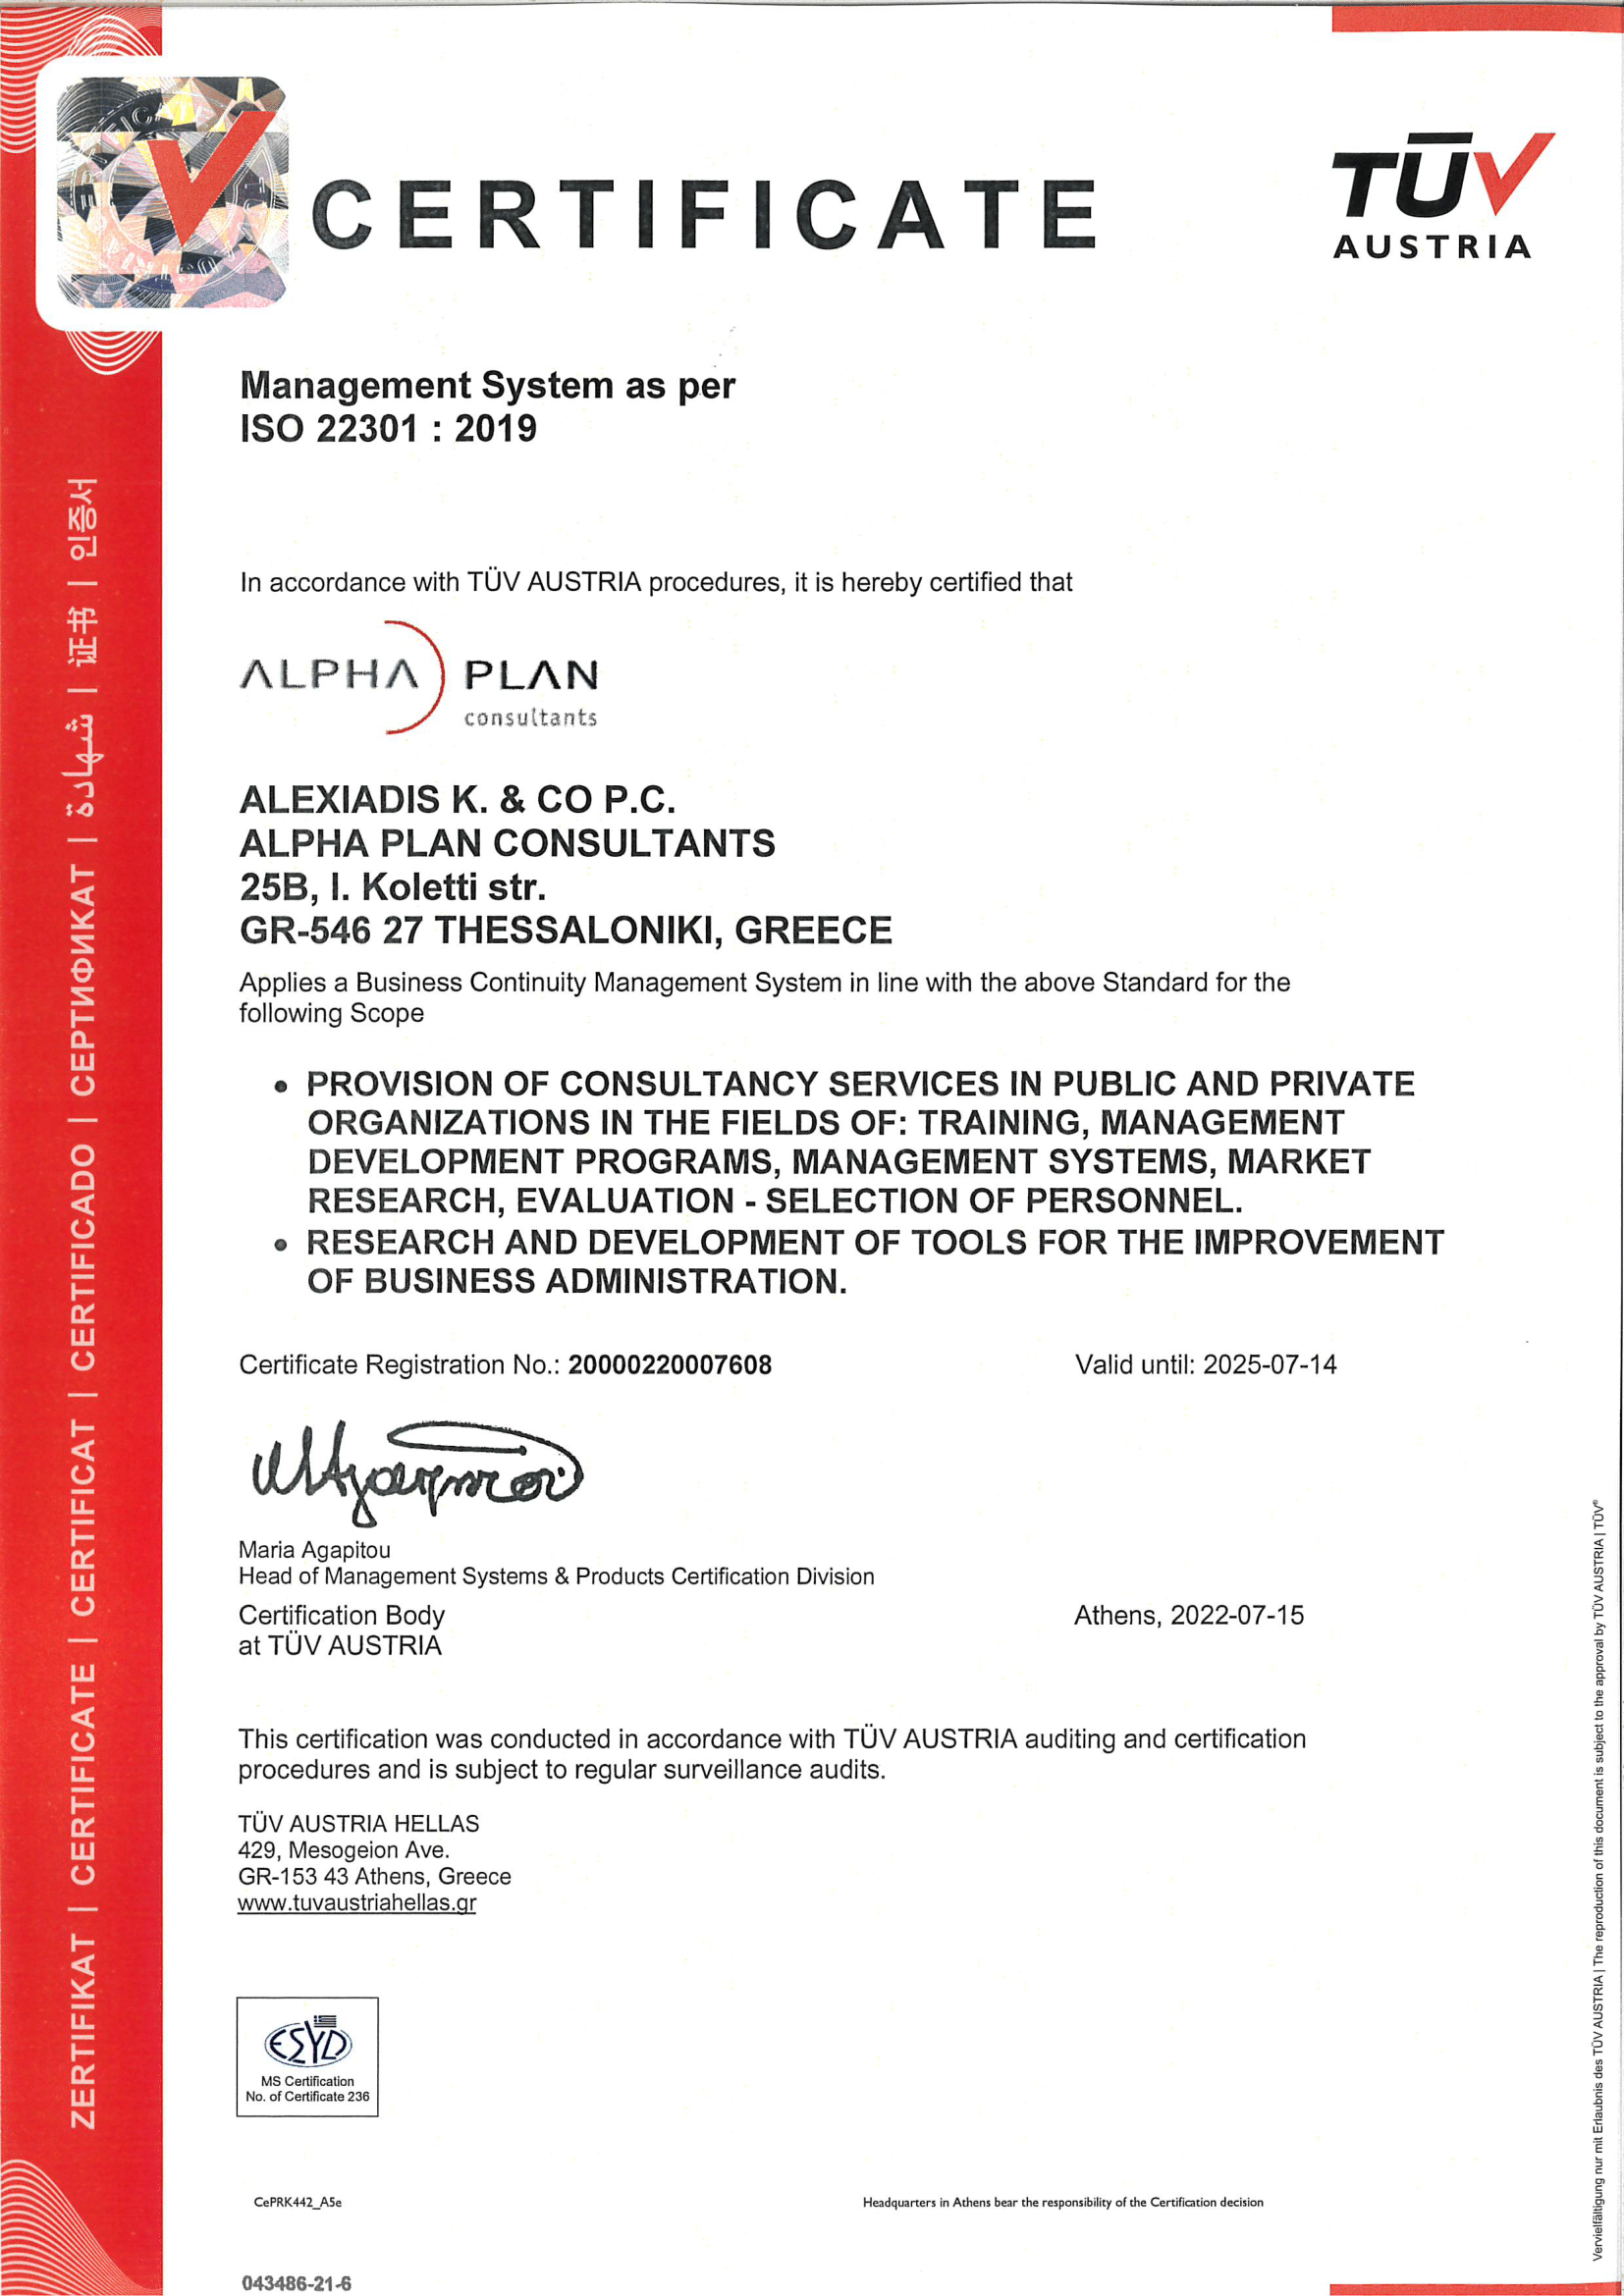 Certification ISO 22301